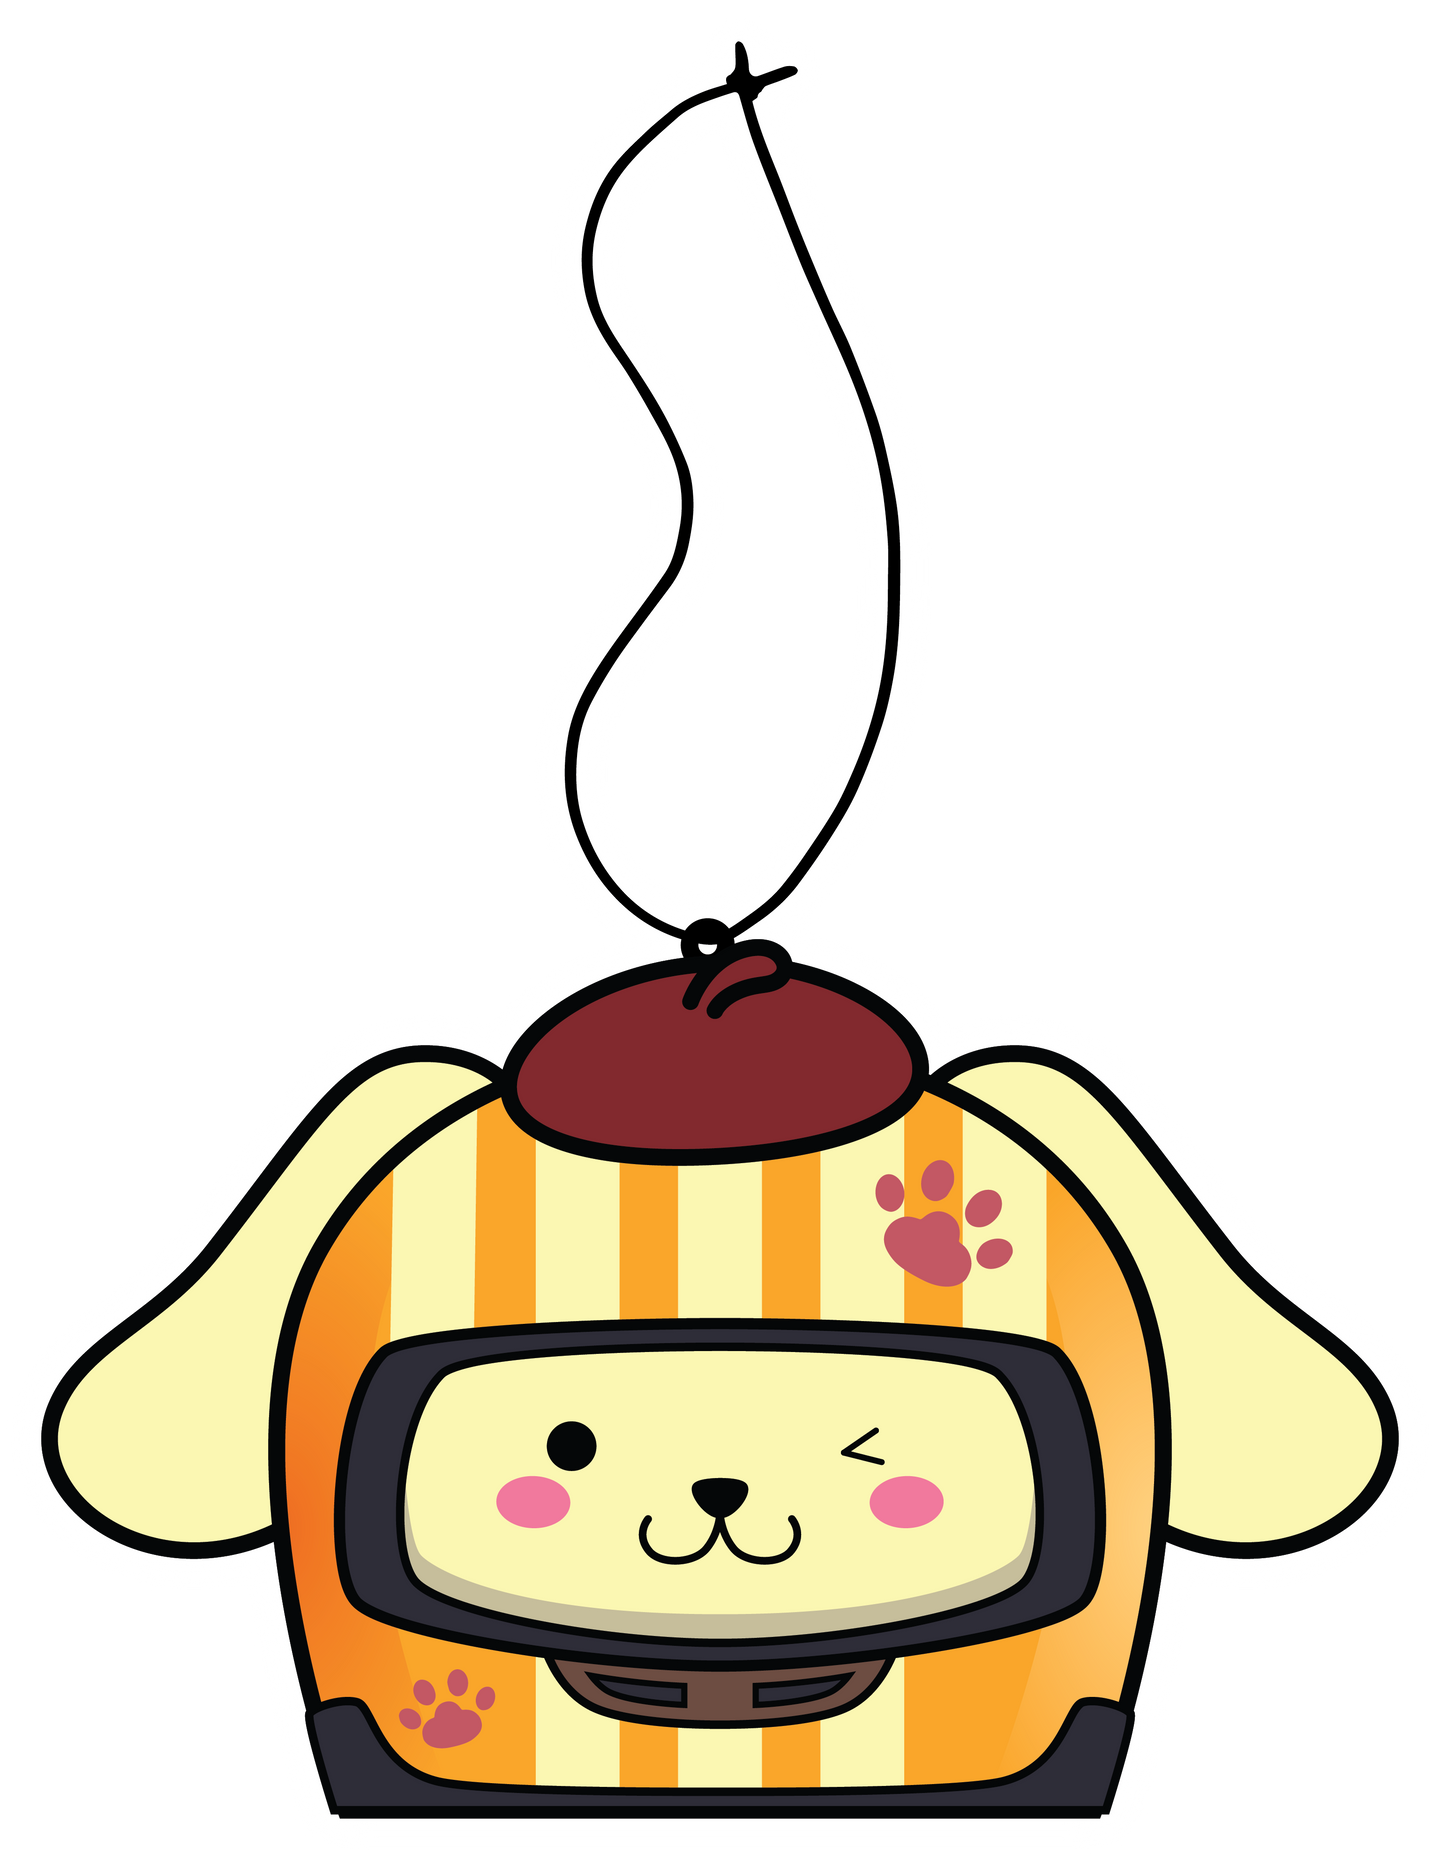 Sanrio Pompompurin Dog Racer Airfreshener hanging from black string. Cream Color dog with orange cream stripe and hat winking with paw prints on helmet.